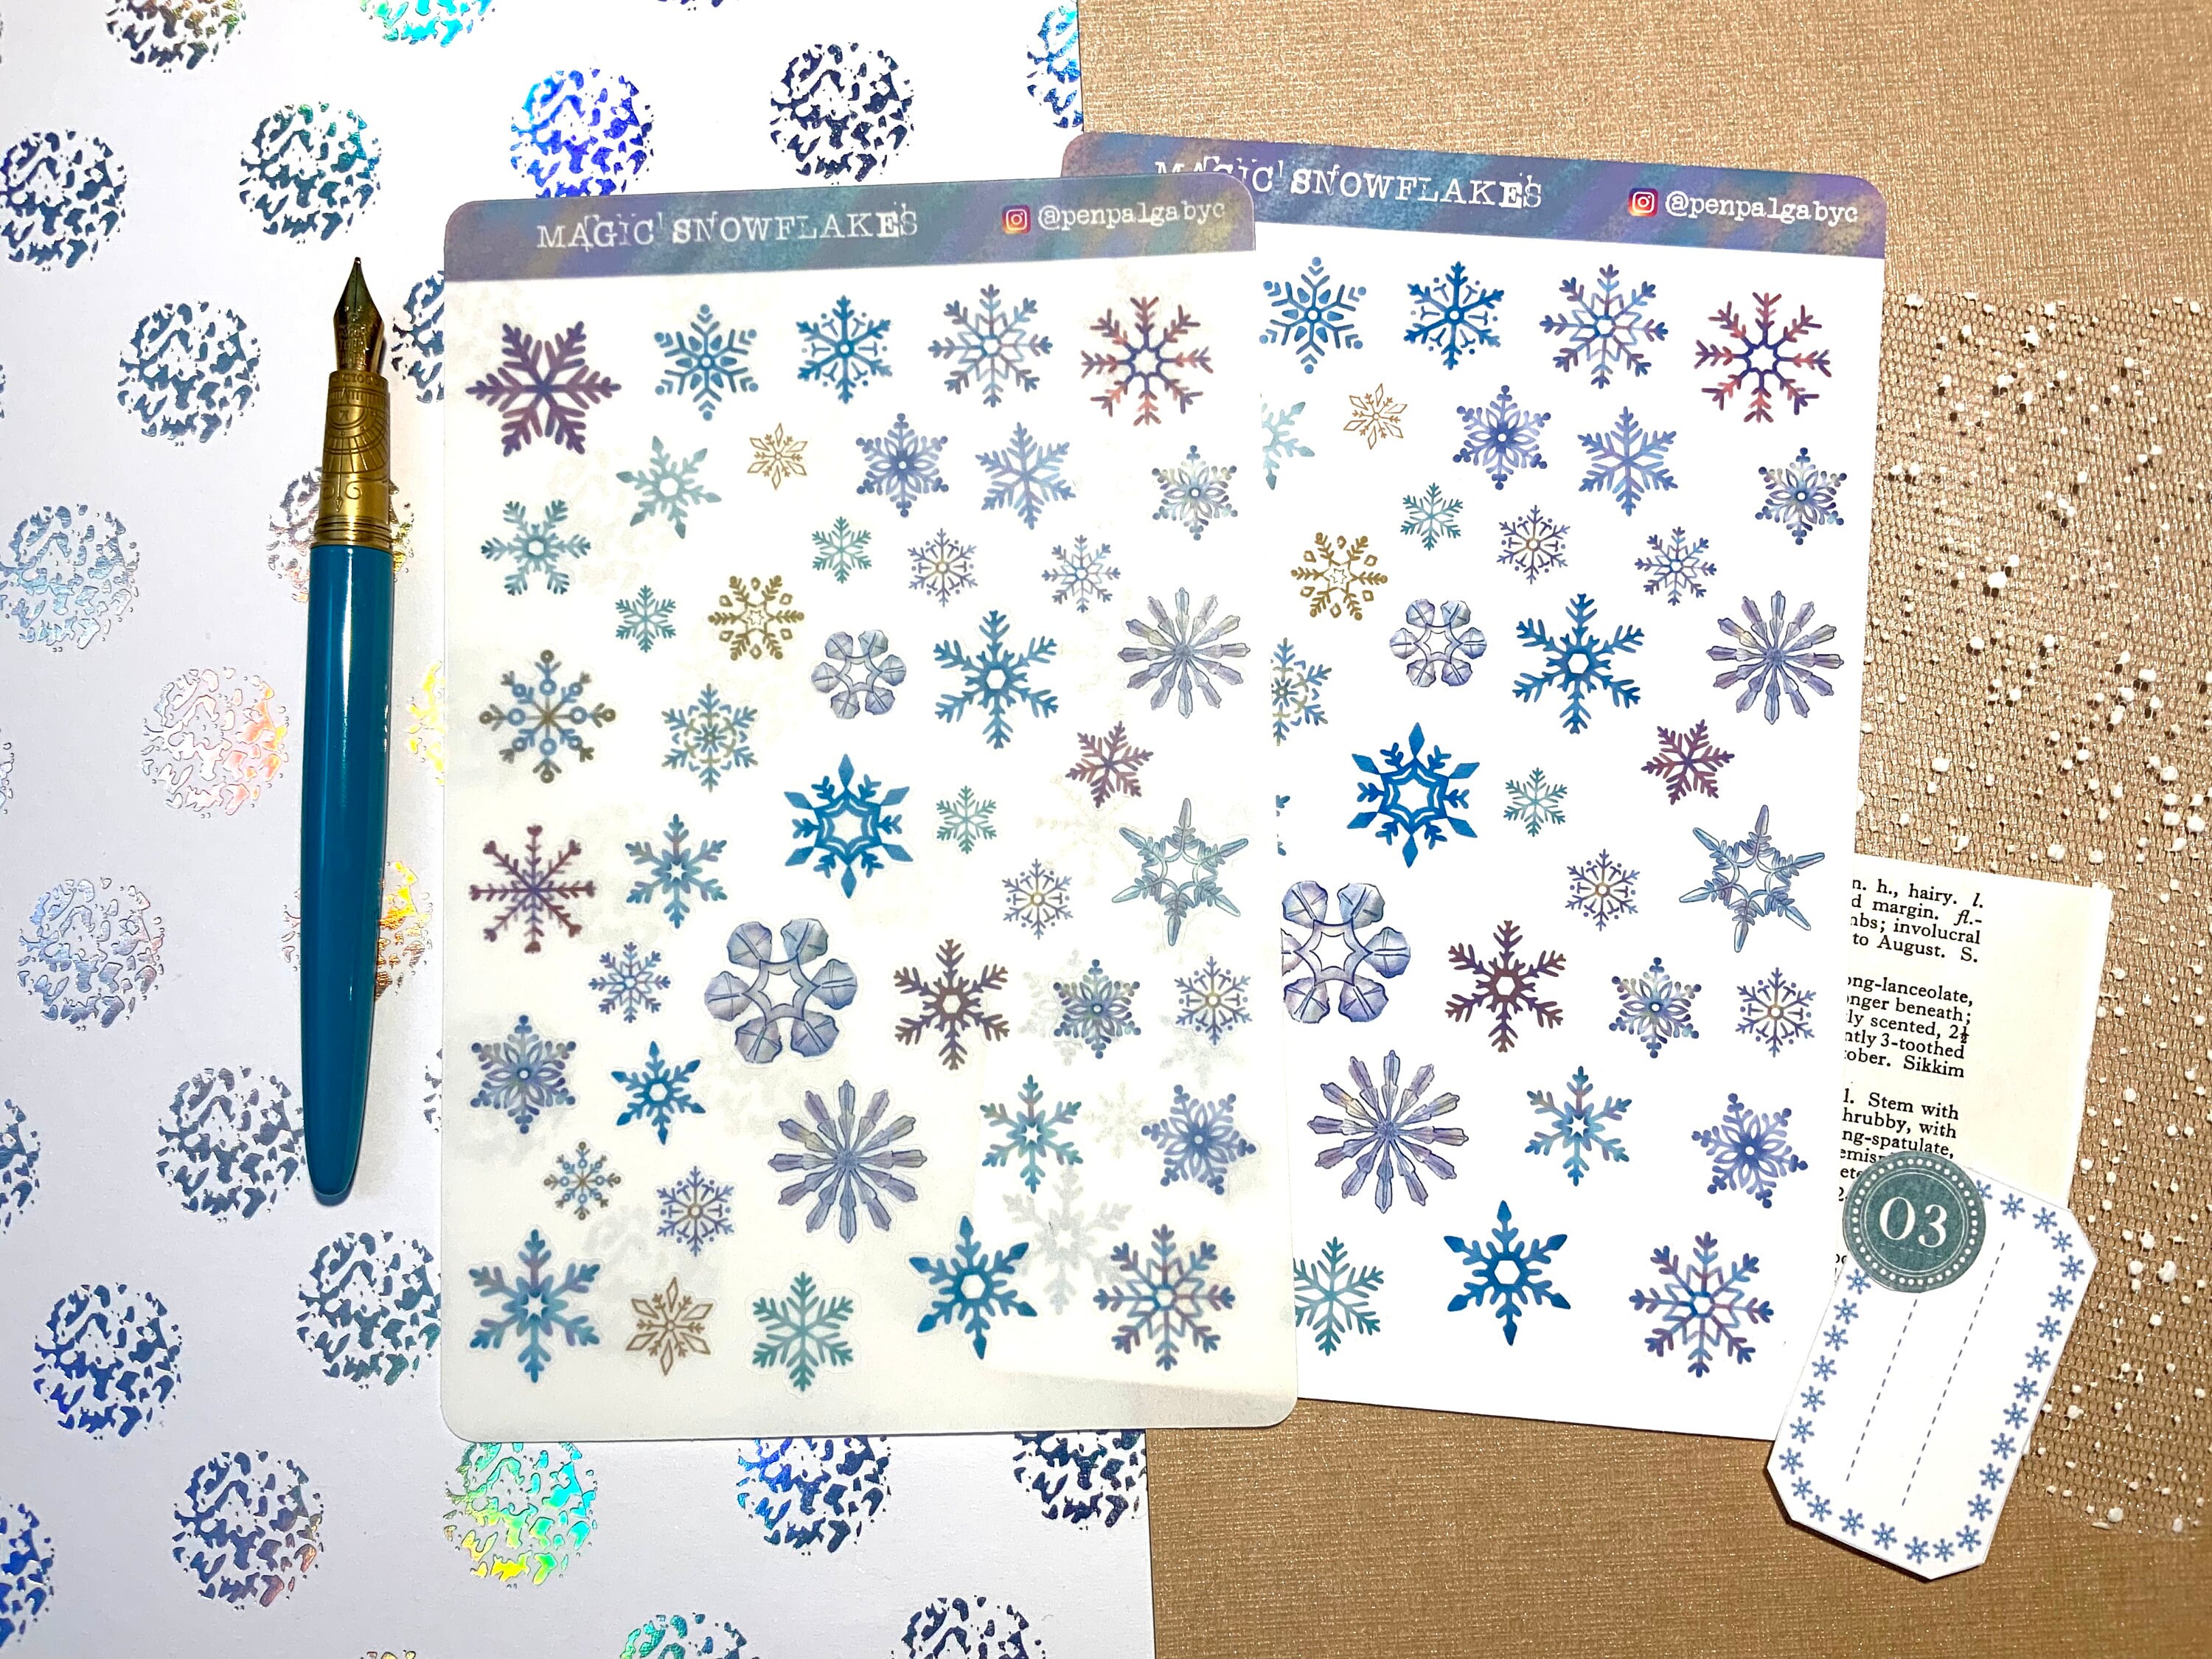 Tiny Snowflake Rubber Ink Stamp, Christmas Craft Wooden Snowflake Stamp,  Festive Crafts, Christmas Card Tag Making